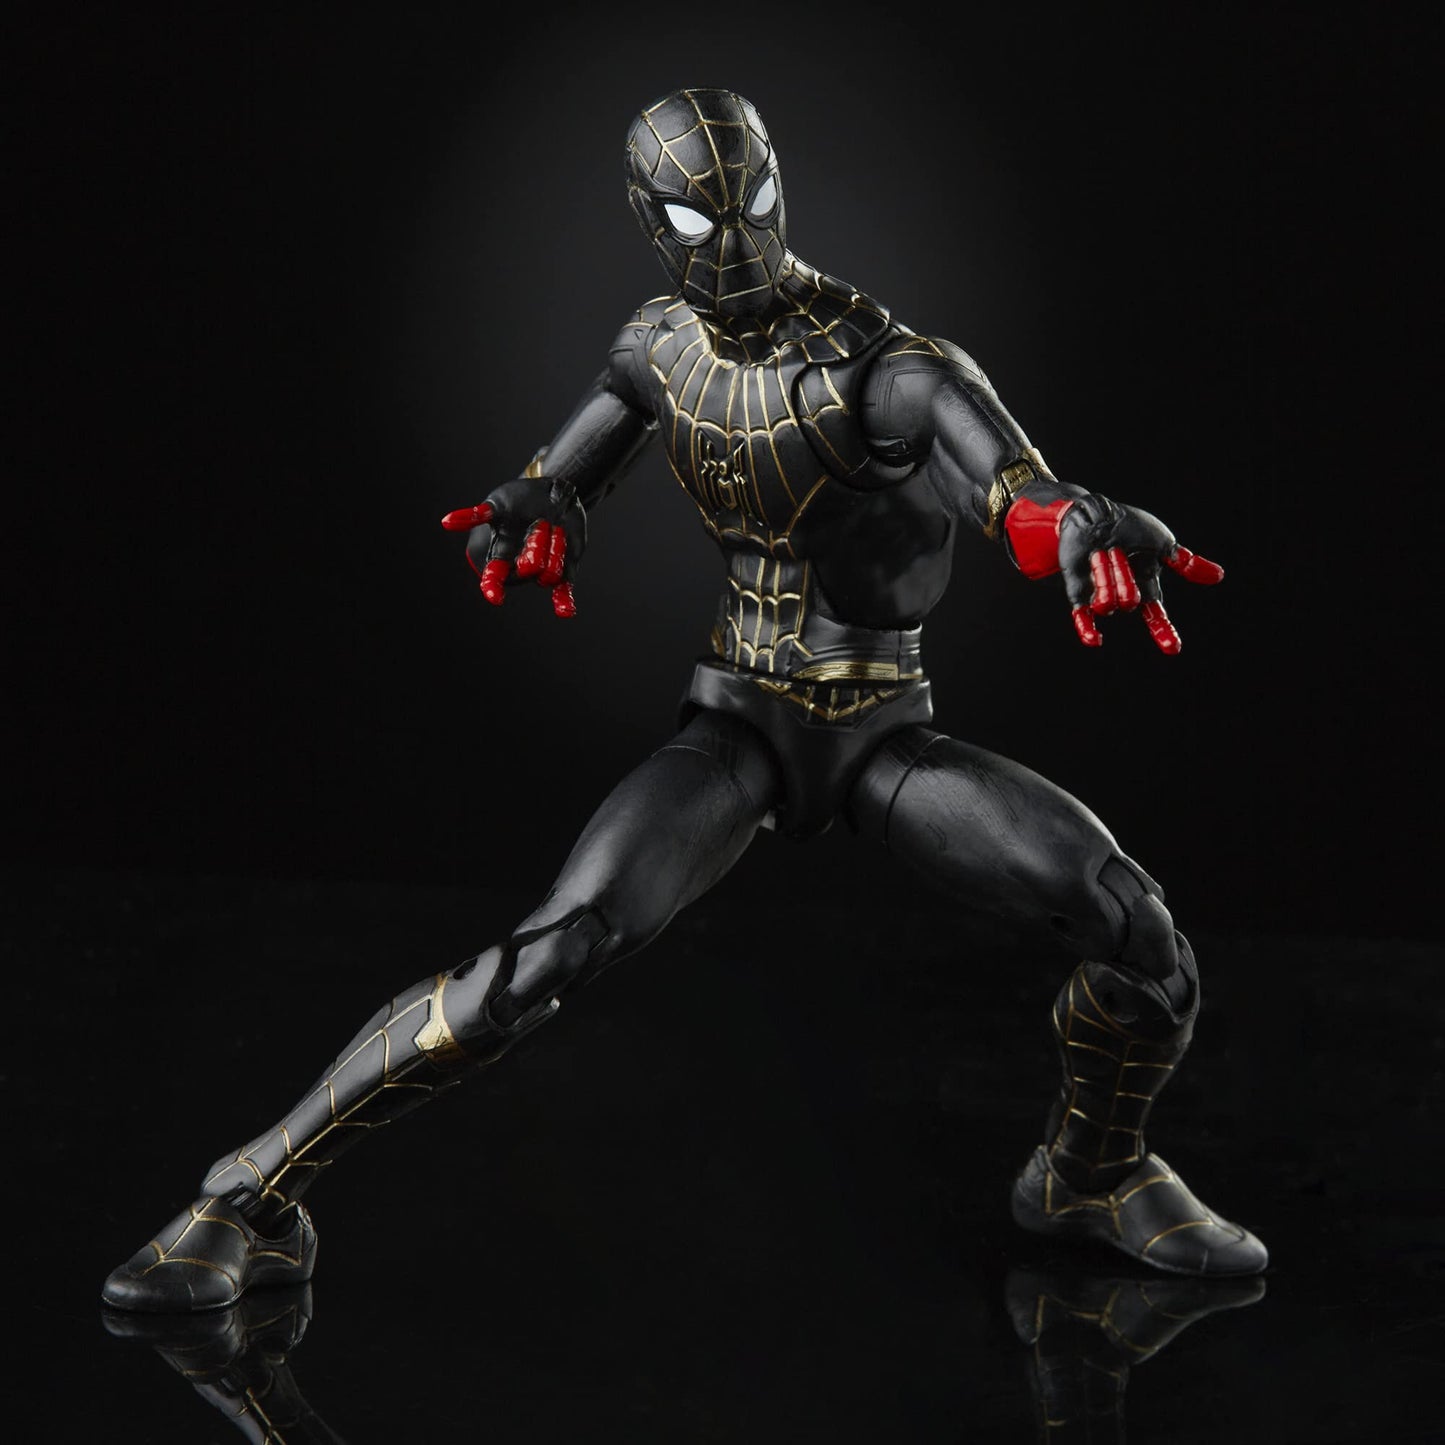 Spider-Man Marvel Legends Series Black & Gold Suit 6-inch Collectible Action Figure Toy, 2 Accessories and 1 Build-A-Figure Part(s)